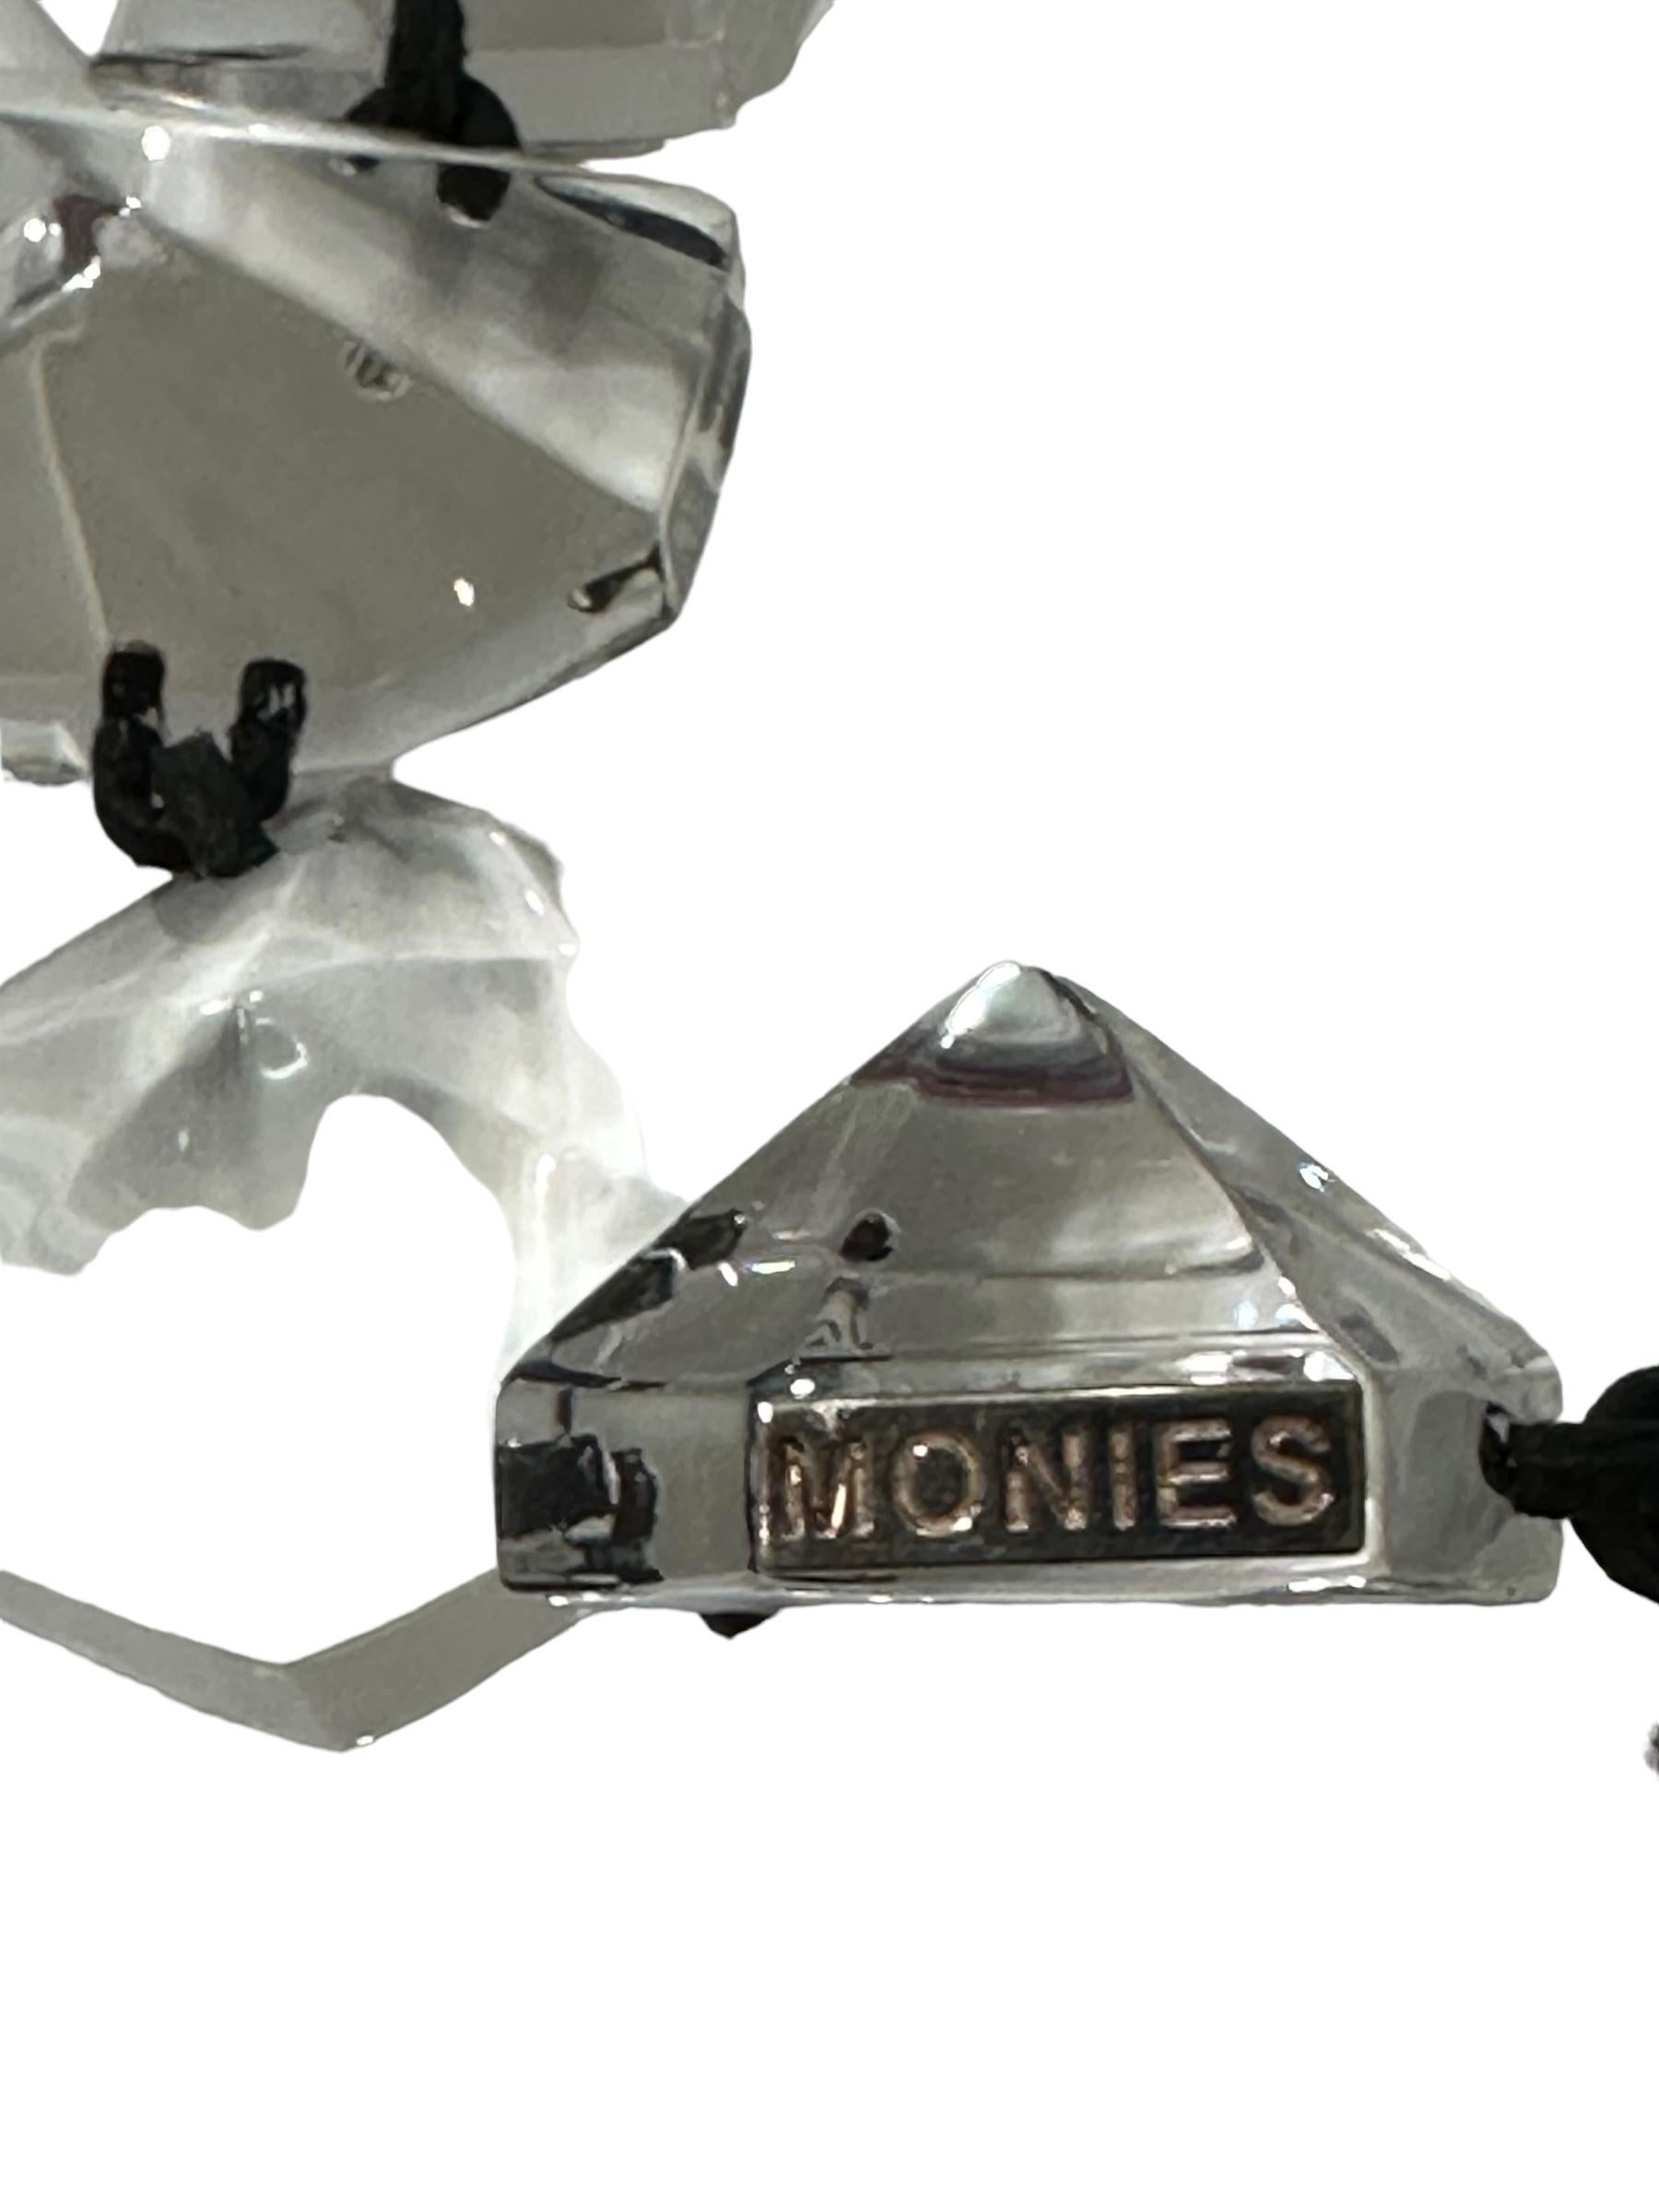 MONIES IS A DANISH JEWELRY  COMPANY FOUNDED IN 1973 BY GERDA AND NIKOLAI MONIES. ALTHOUGH BOTH ARE CLASSICALLY TRAINED GOLDSMITHS, IT WAS THEIR INTEREST AND LOVE FOR UNCONVENTIONAL NATURAL MATERIALS AND OVERSIZED AVANTGARDE JEWELLERY THAT MADE THEM